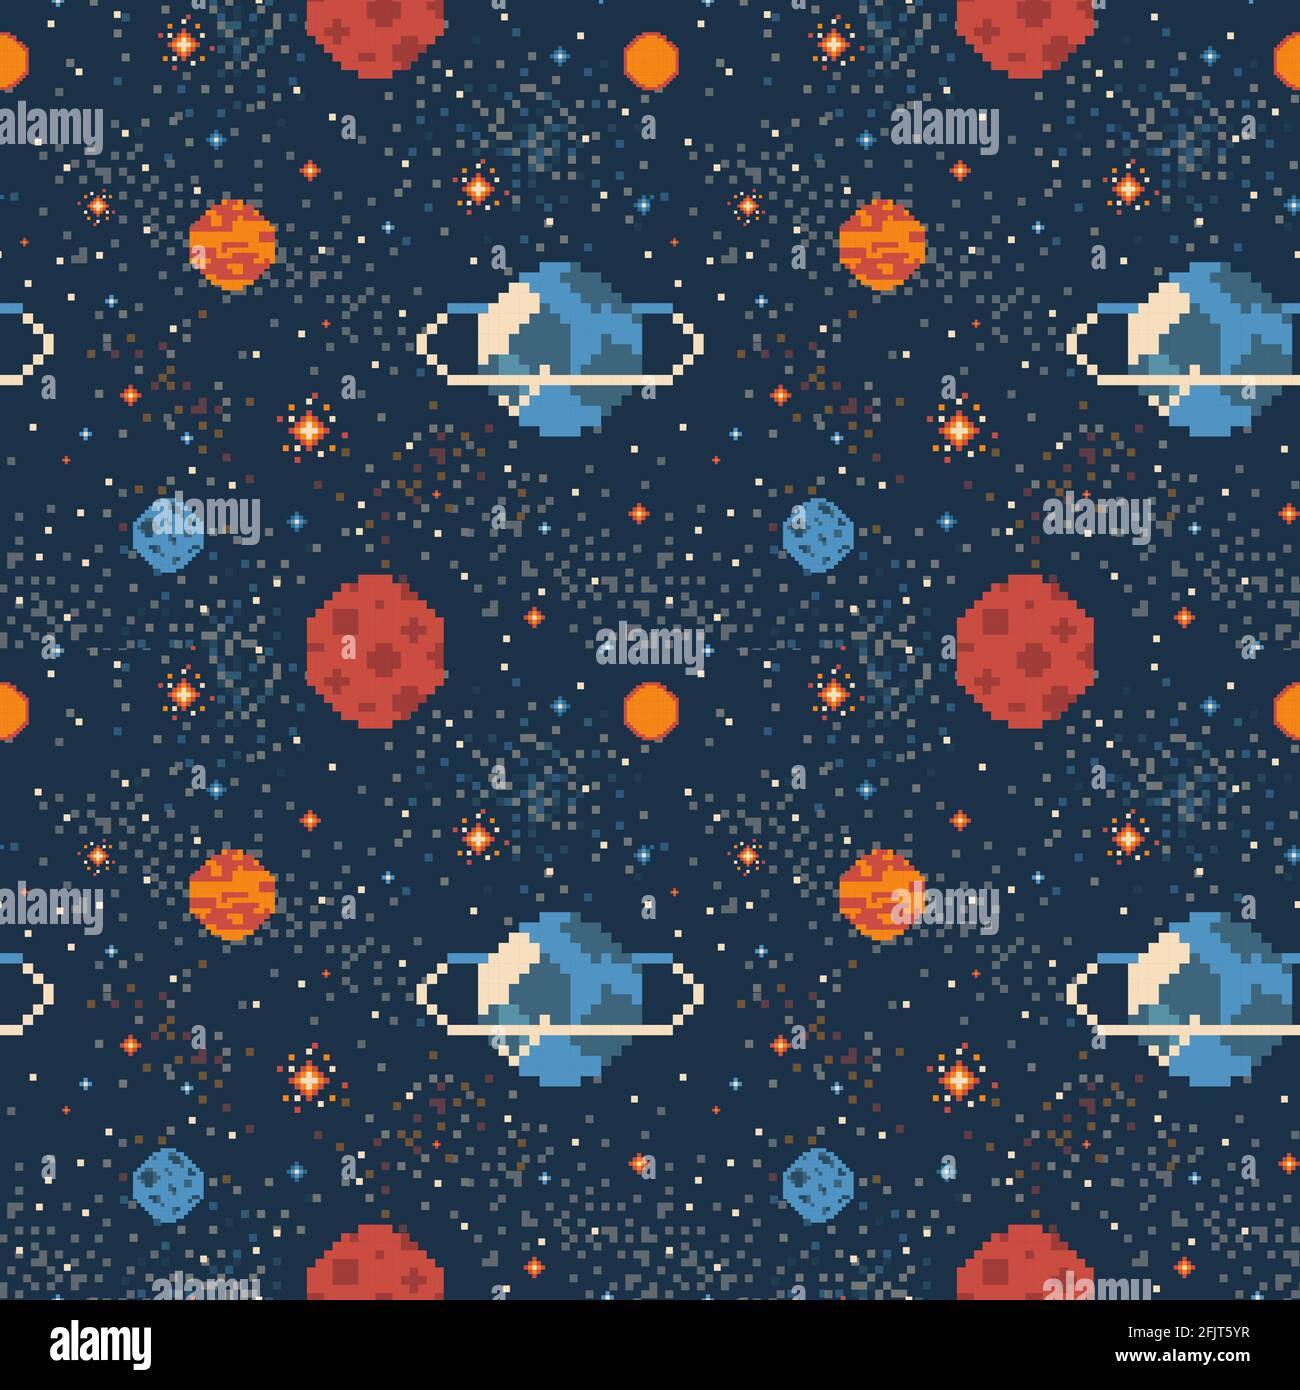 Pixel Art Planets in Space Galaxy Pattern Stock Vector